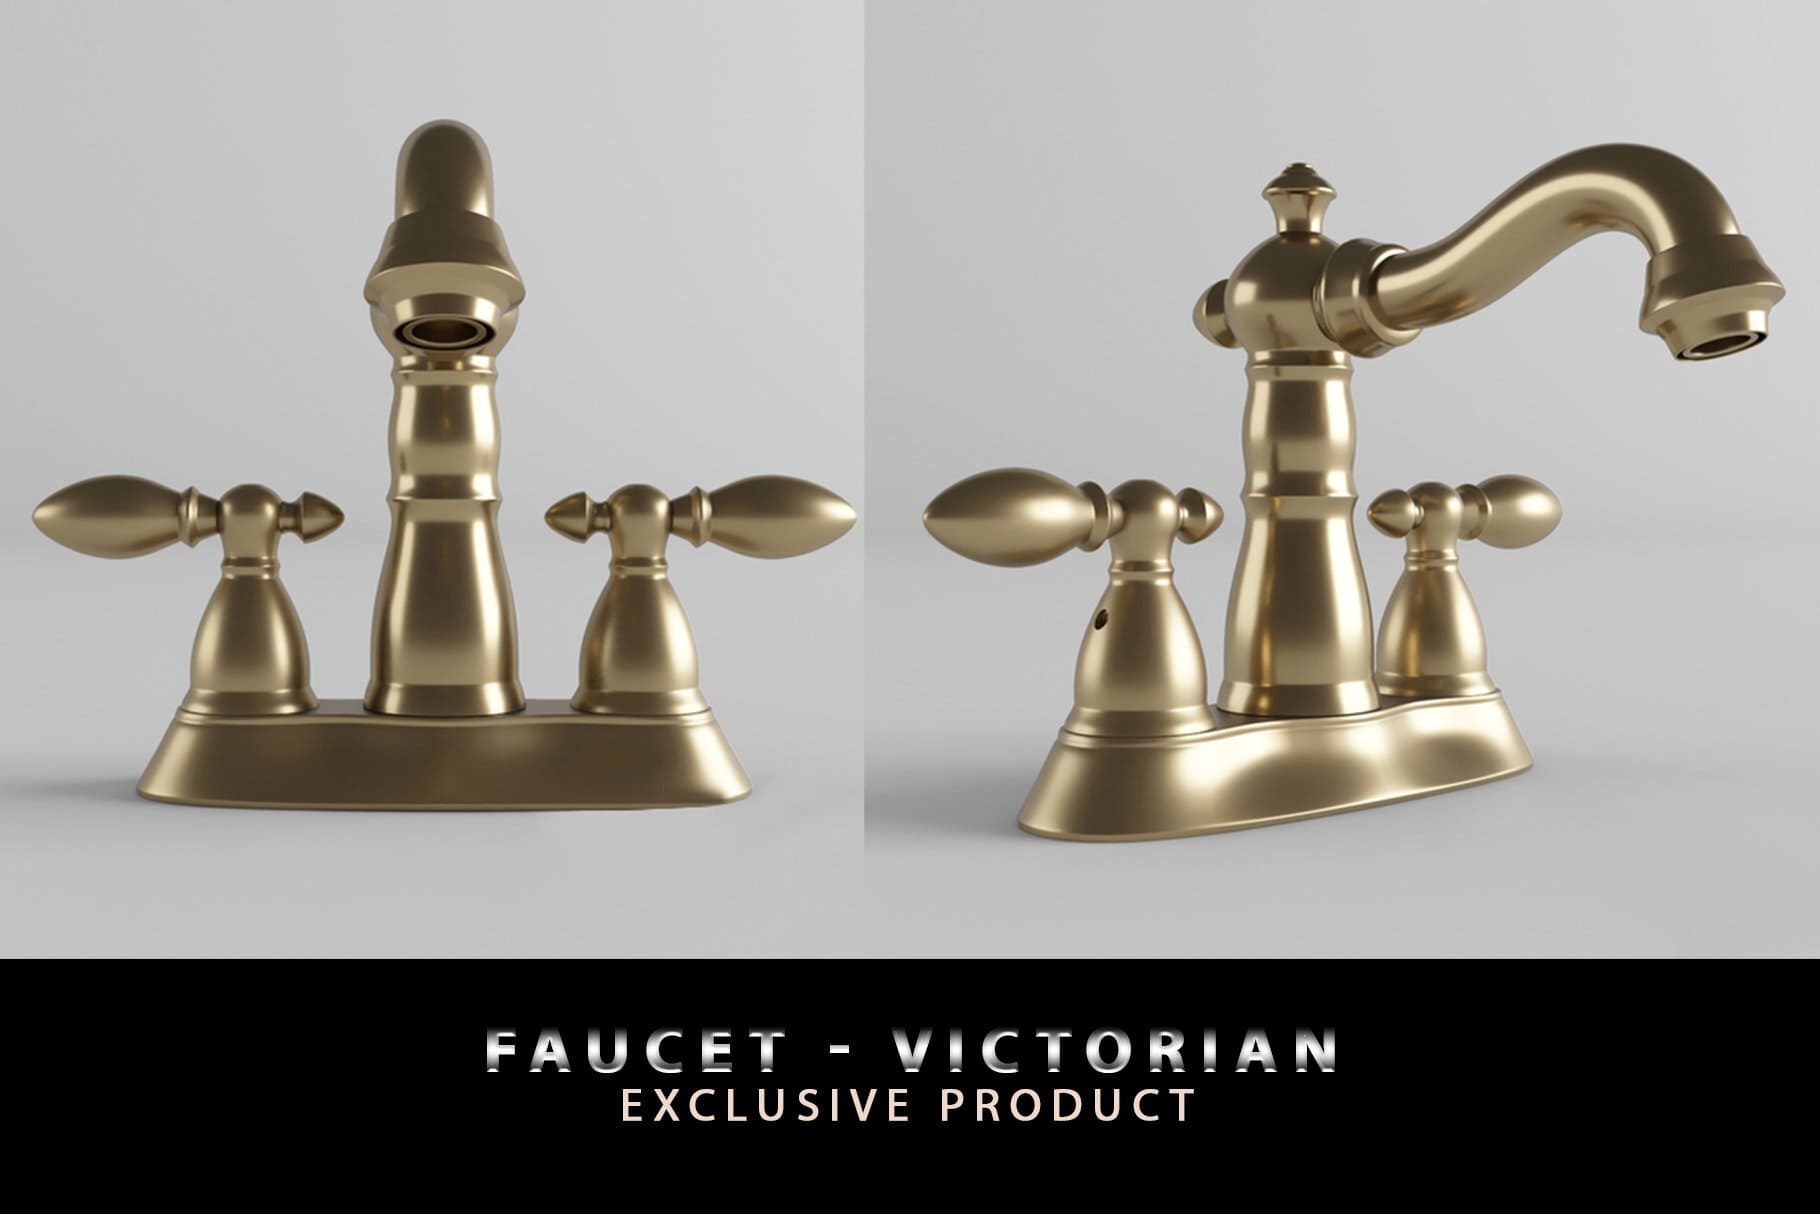 Faucet – Victorian exclusive product.